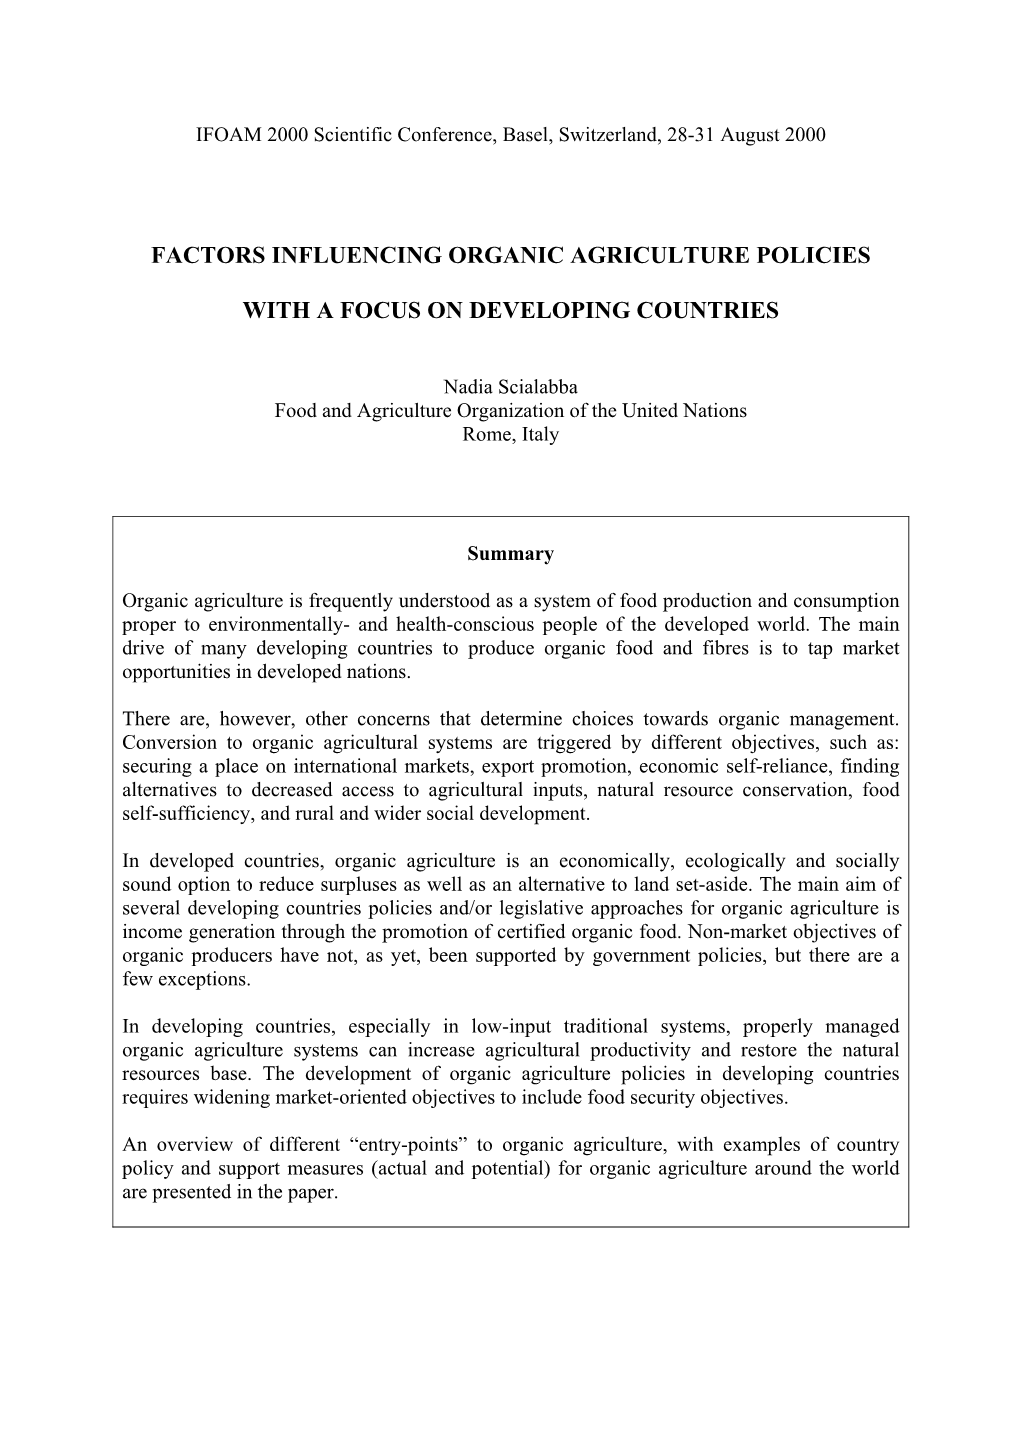 Presentation to the Policy Workshop of the IFOAM 2000 Scientific